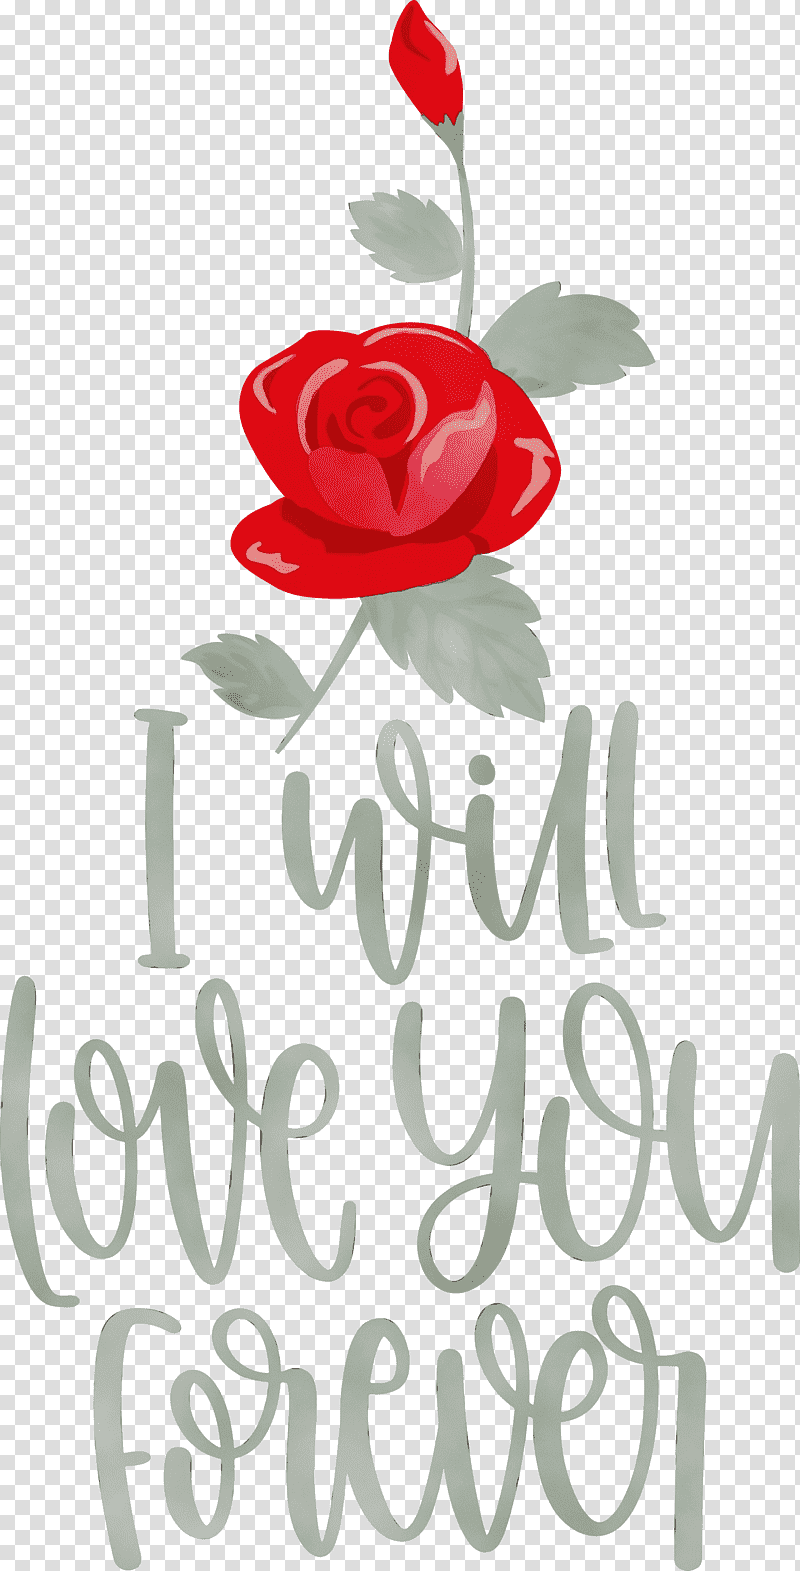 Floral design, Love You Forever, Valentines Day, Watercolor, Paint, Wet Ink, Garden Roses transparent background PNG clipart